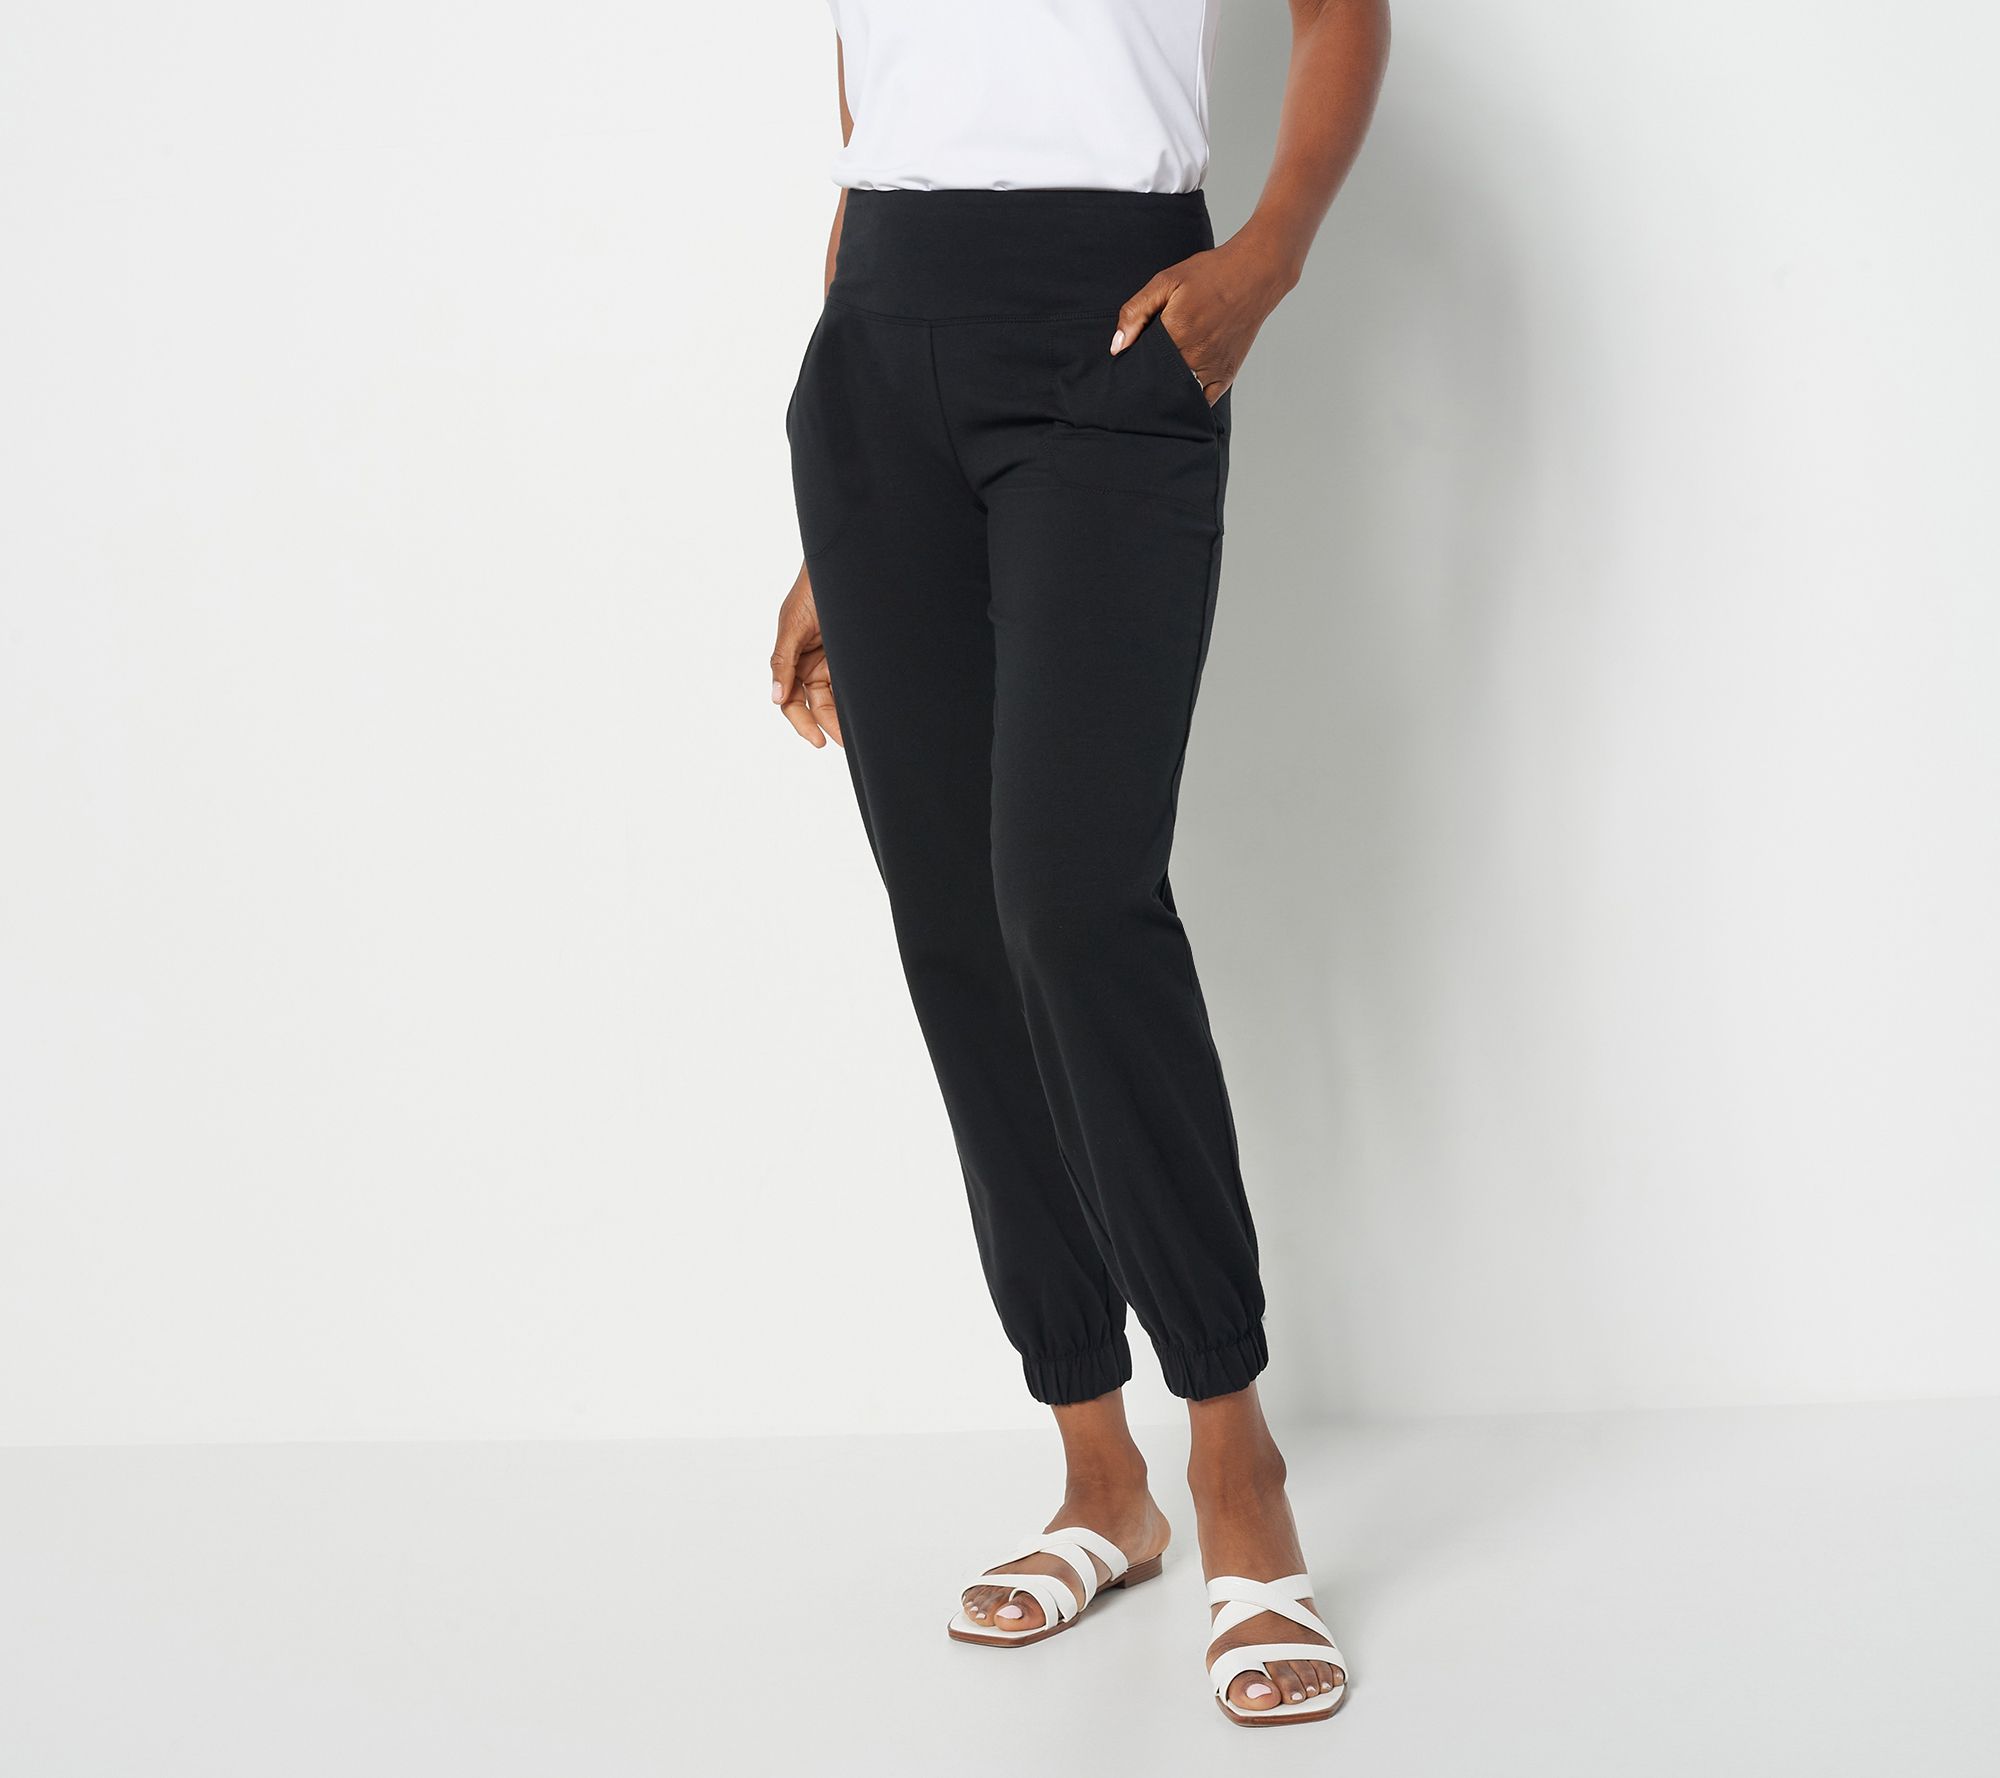 Isaac Mizrahi Live! Tall Stretch Pull On Ankle Length Leggings